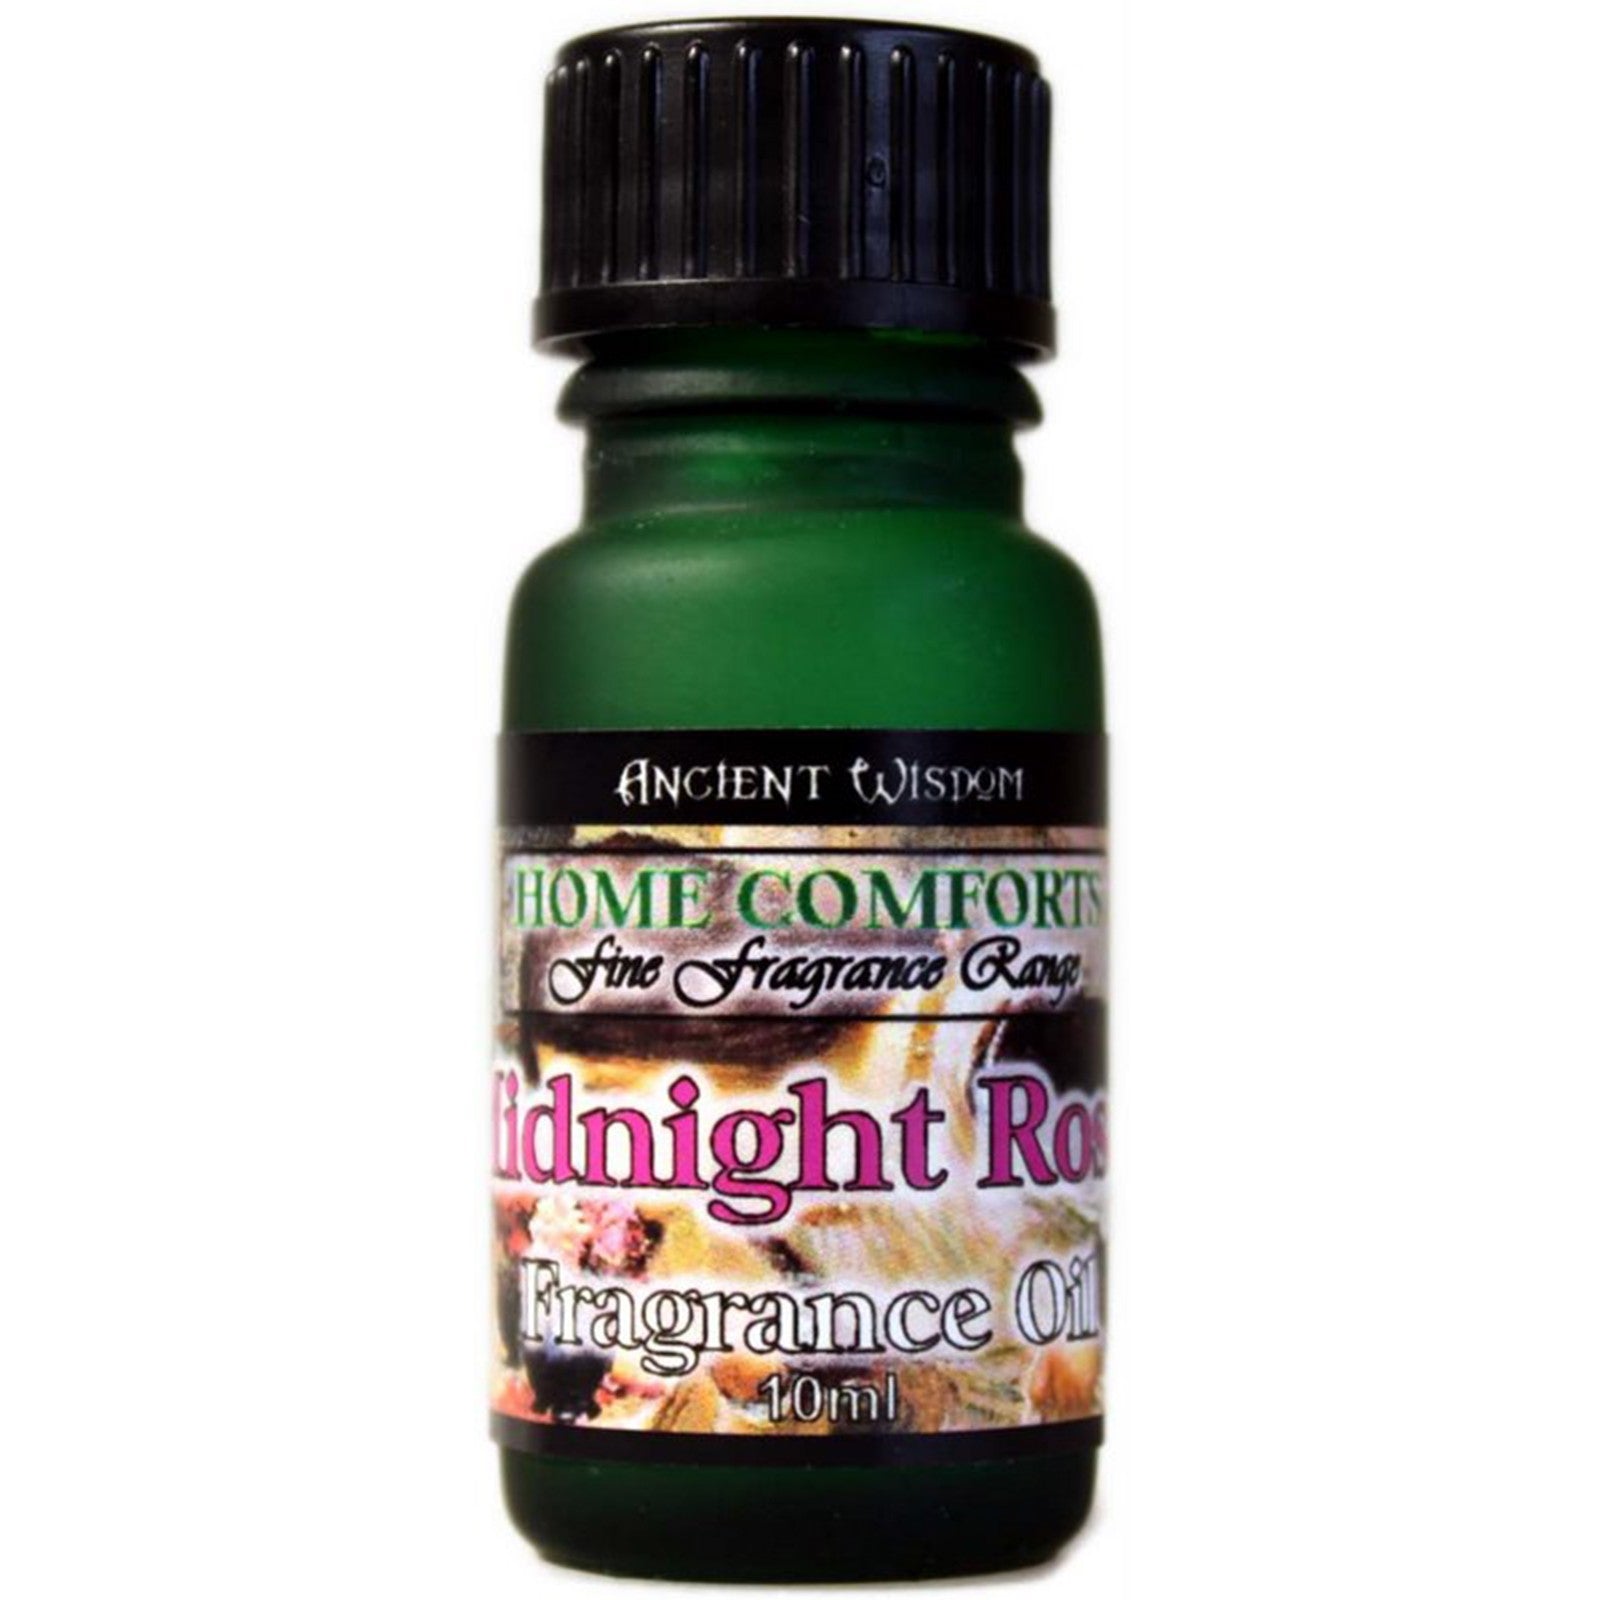 View 10ml Bedroom Midnight Roses Fragrance Oil information